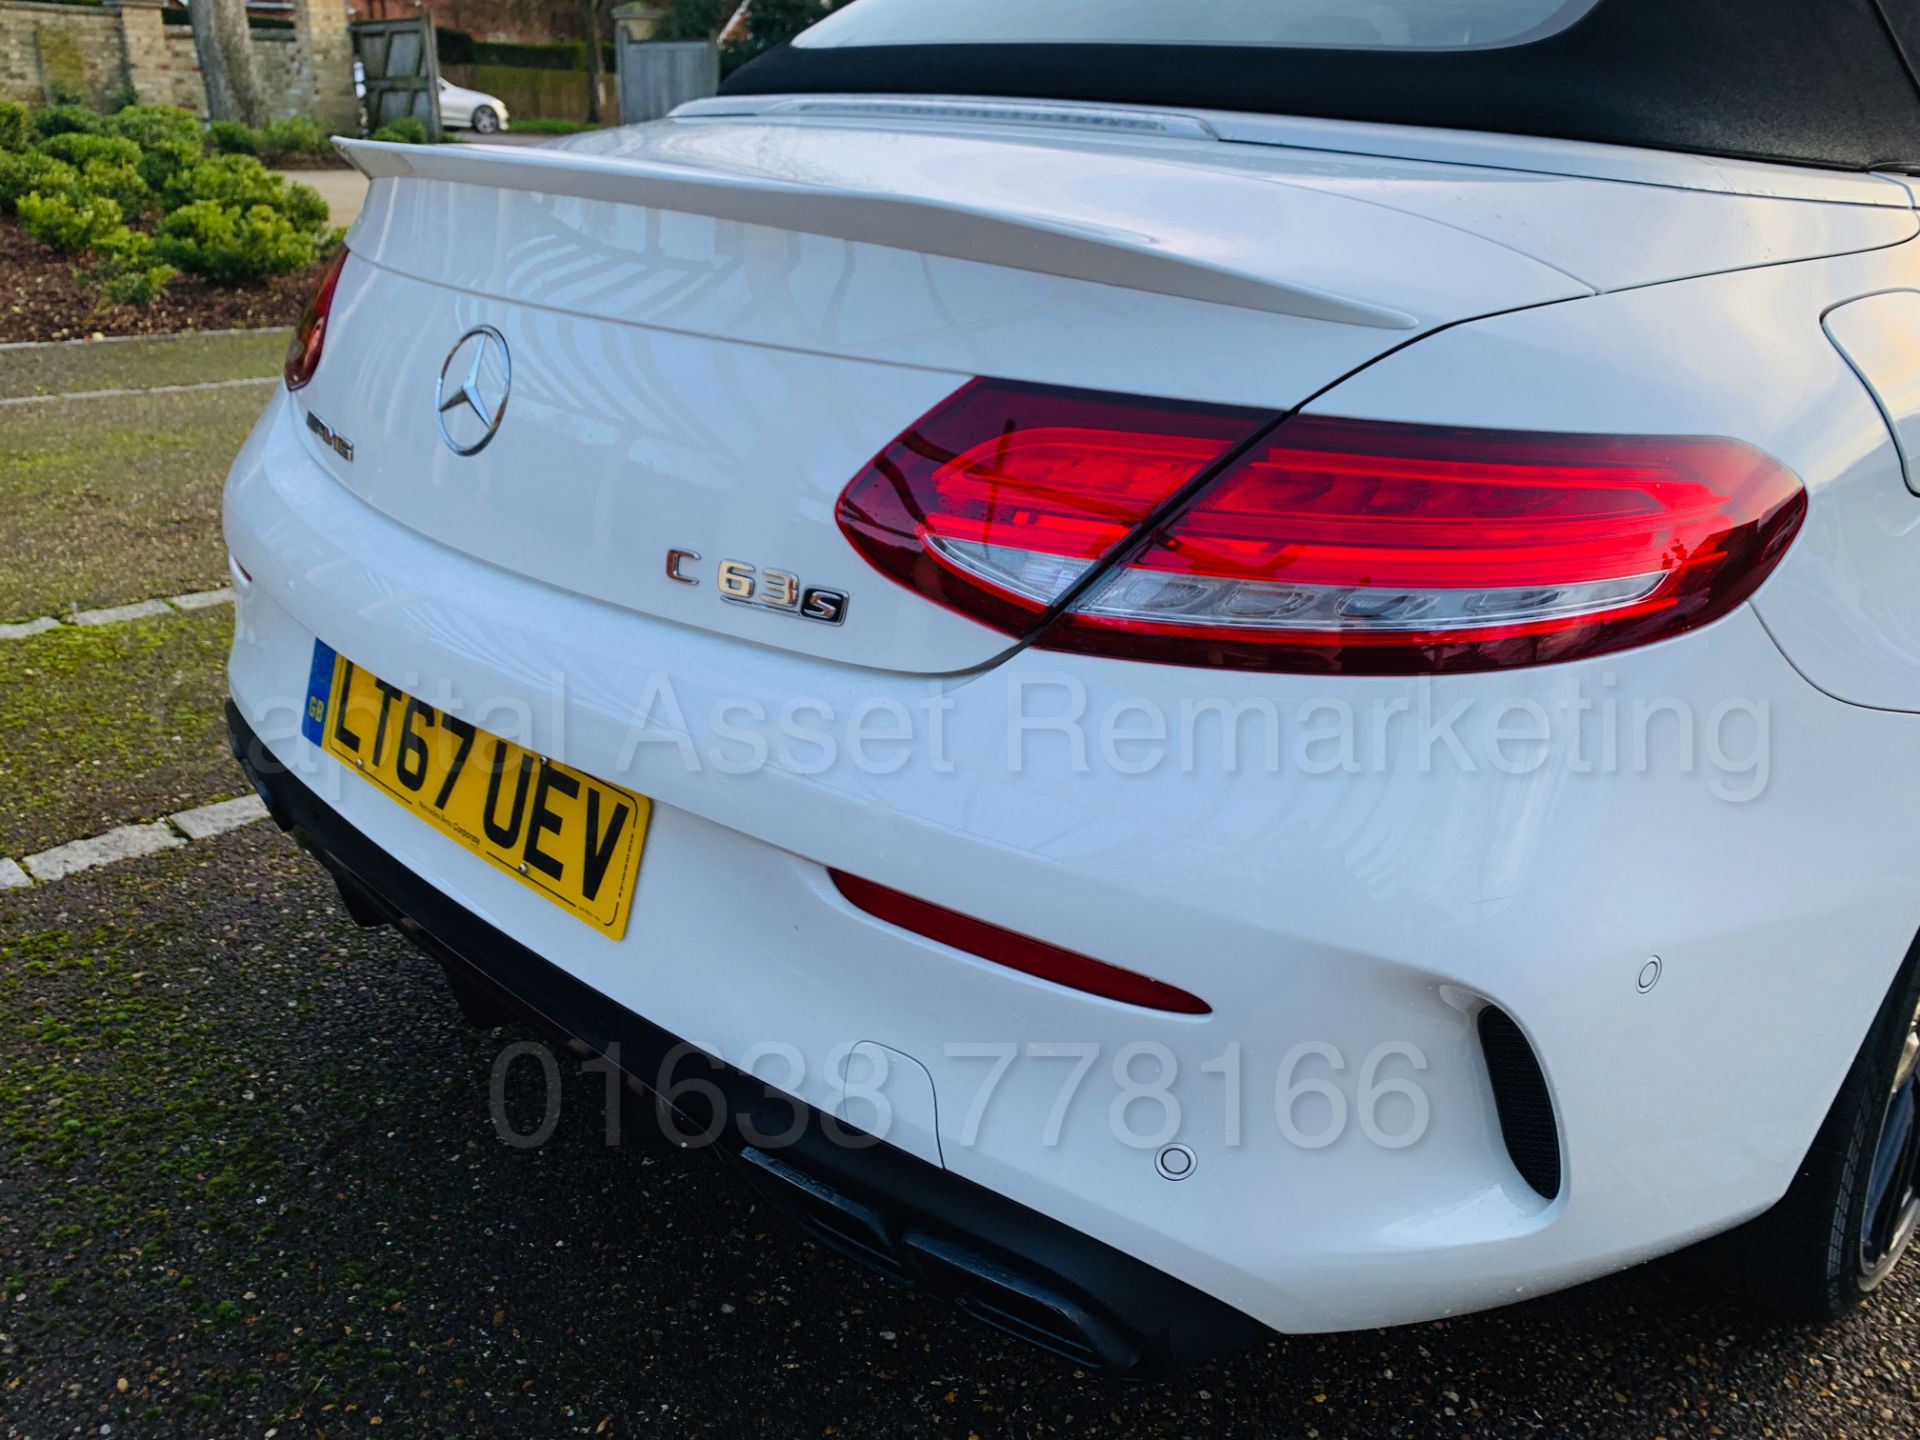 (On Sale) MERCEDES-BENZ AMG C63-S *CABRIOLET* (67 REG) '4.0 BI-TURBO -510 BHP - AUTO' *FULLY LOADED* - Image 31 of 79